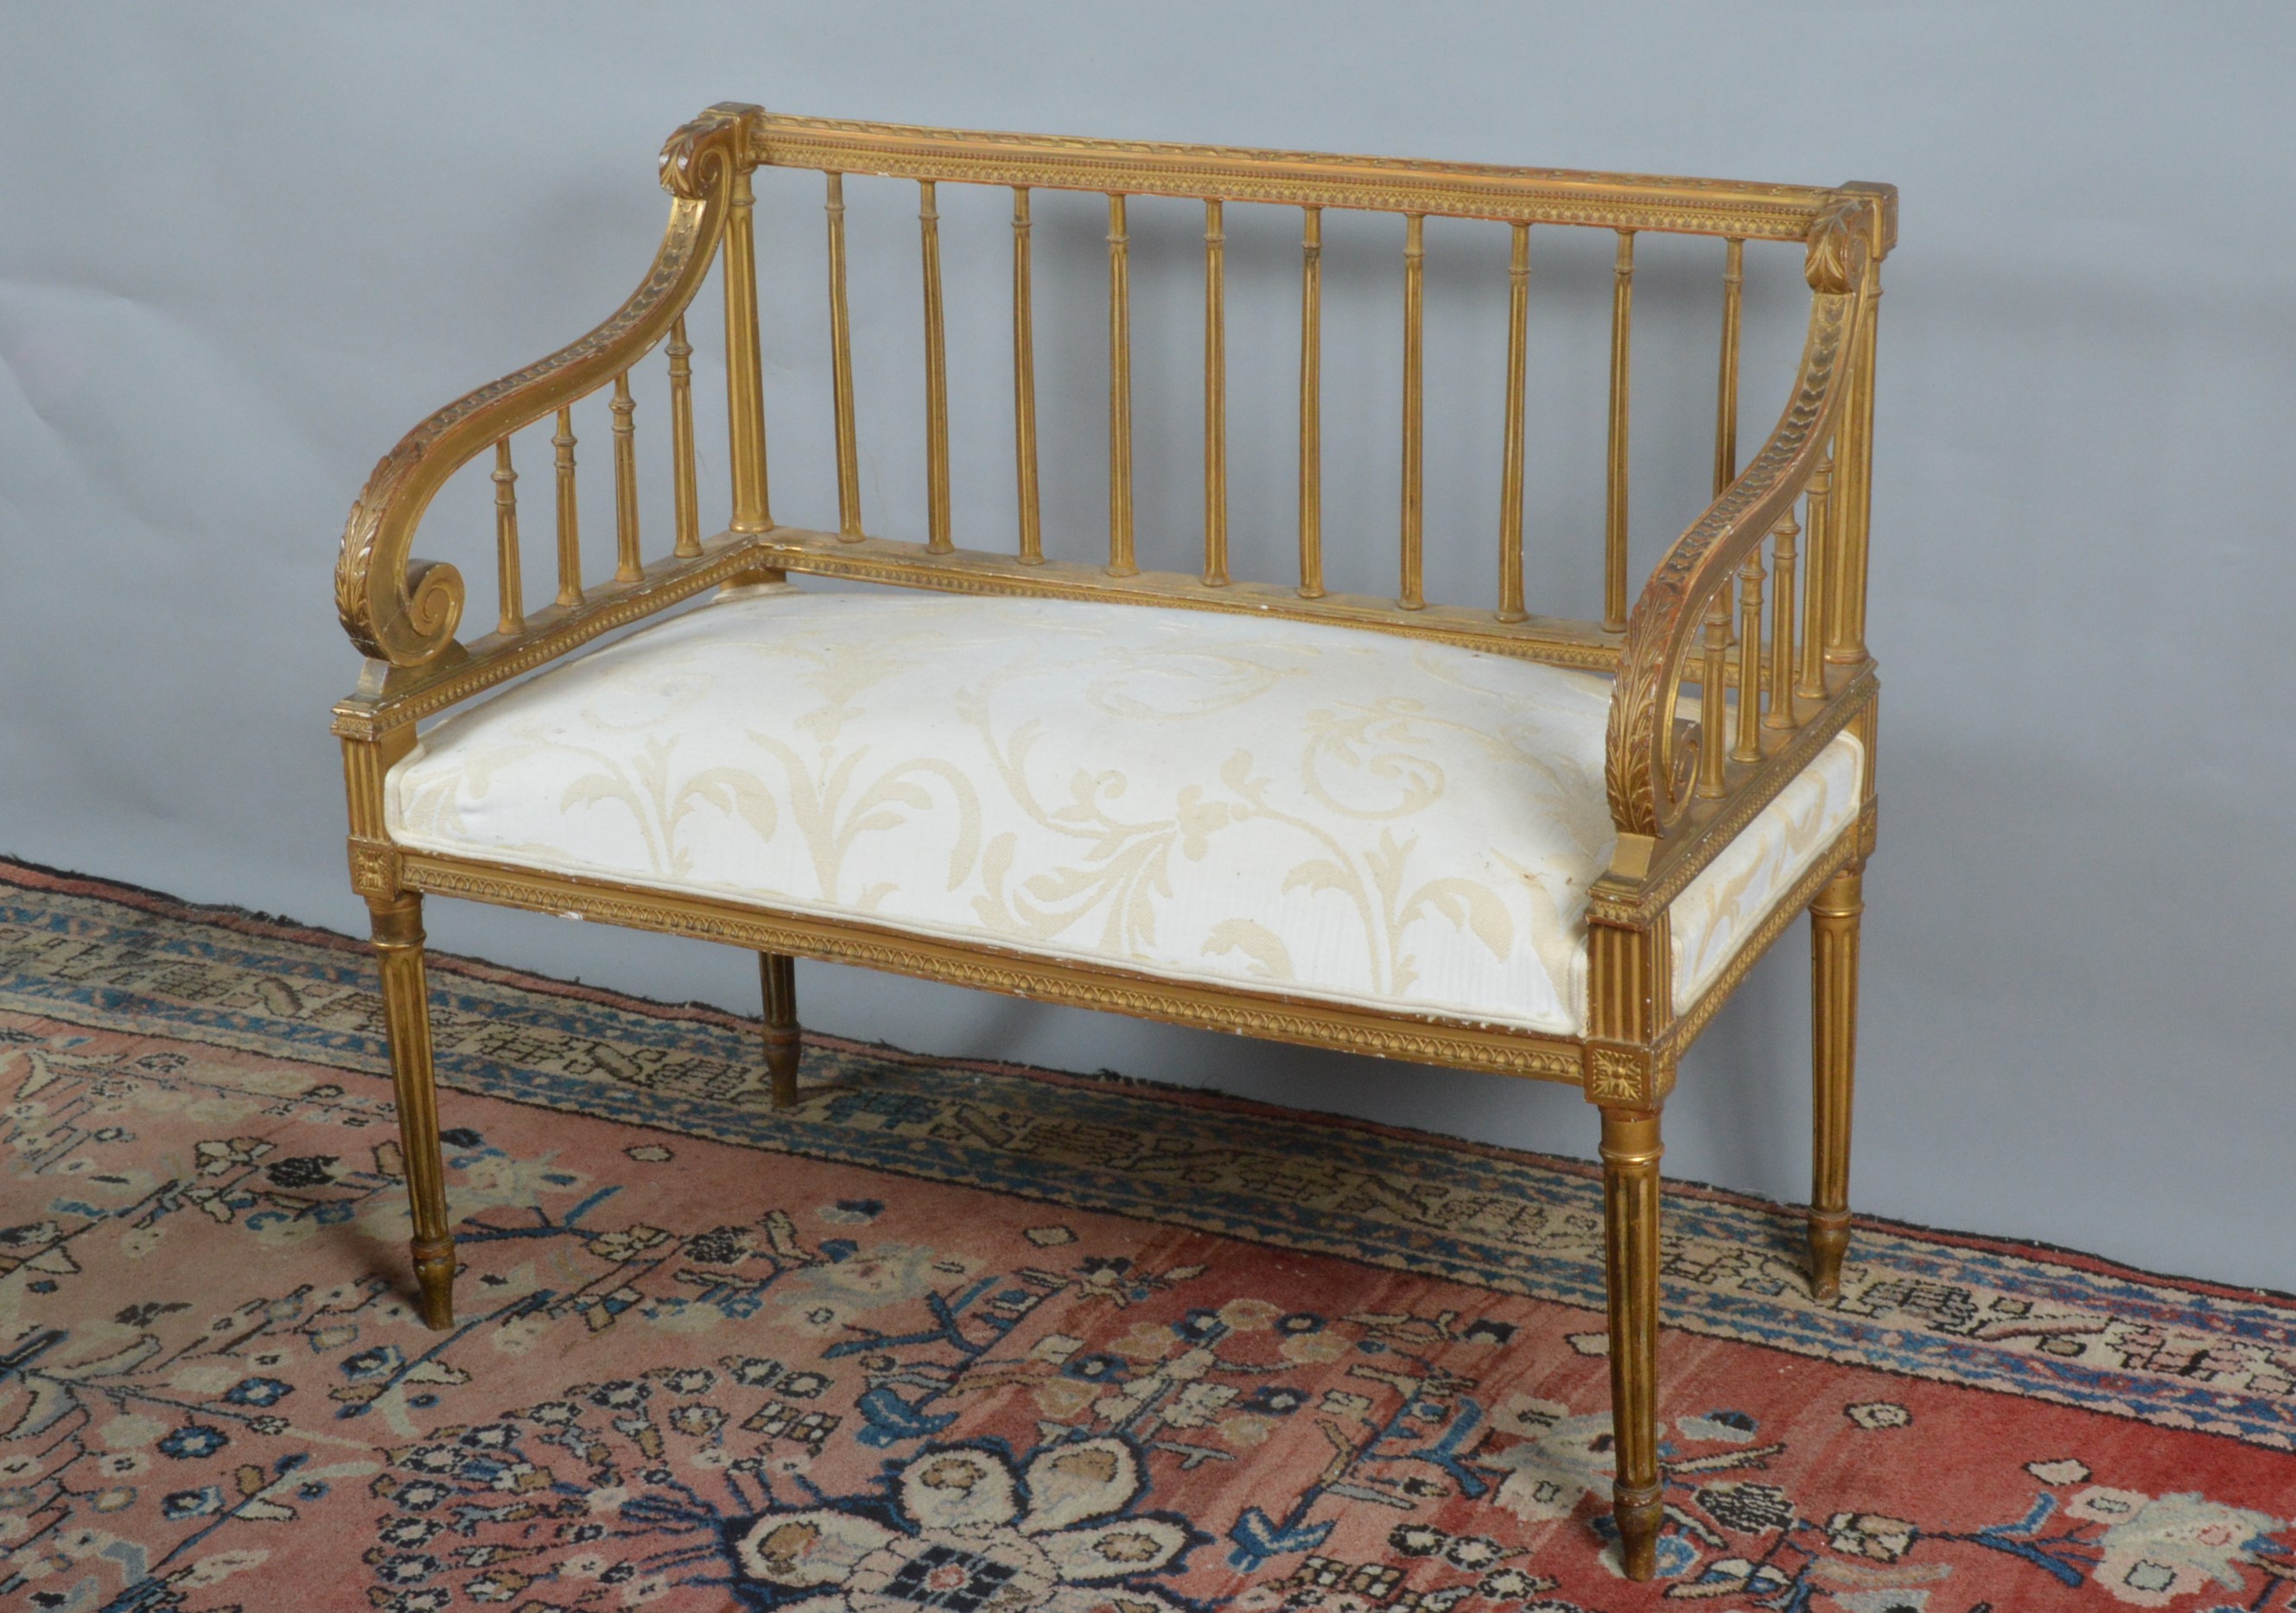 A French giltwood two person settee, fluted column back splat, ornate arms, upholstered seat, raised - Image 2 of 2